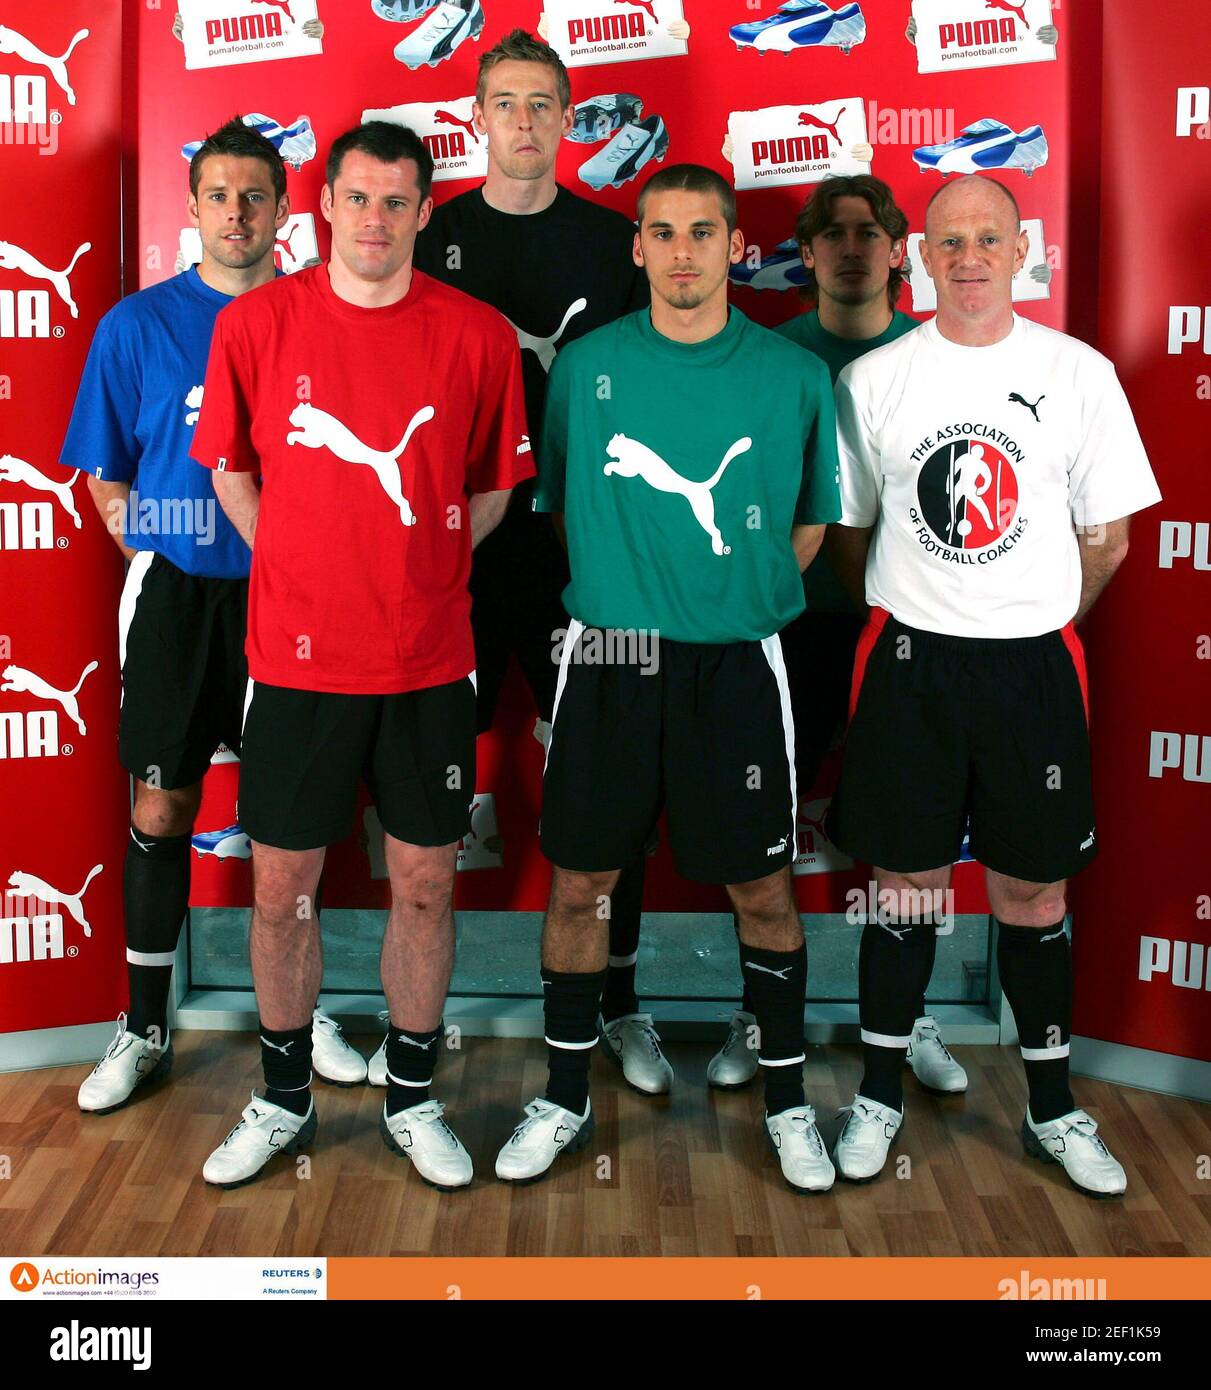 Football - PUMA Boot Launch 03/05/2006 - JJB Dome, Trafford Centre - 3/5/06  Premiership players attend the launch of Puma's new V-Konstrukt boot. From  the left James Beattie, Jamie Carragher, Peter Crouch,